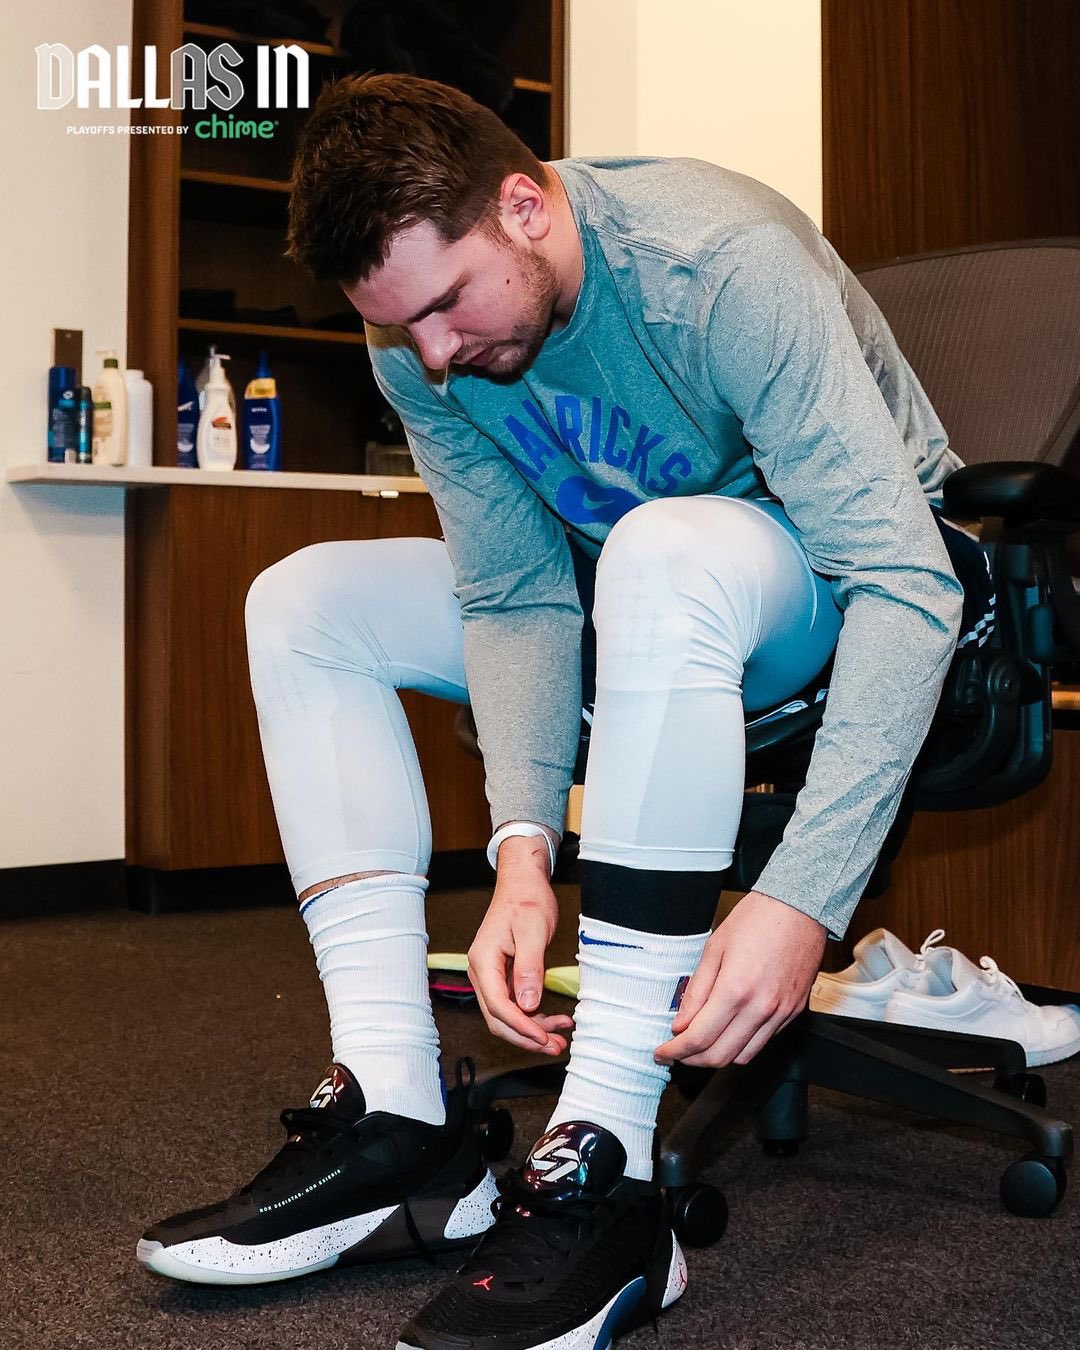 Luka Doncic Wears Custom Lucchese Boots, Outfit Before Dallas